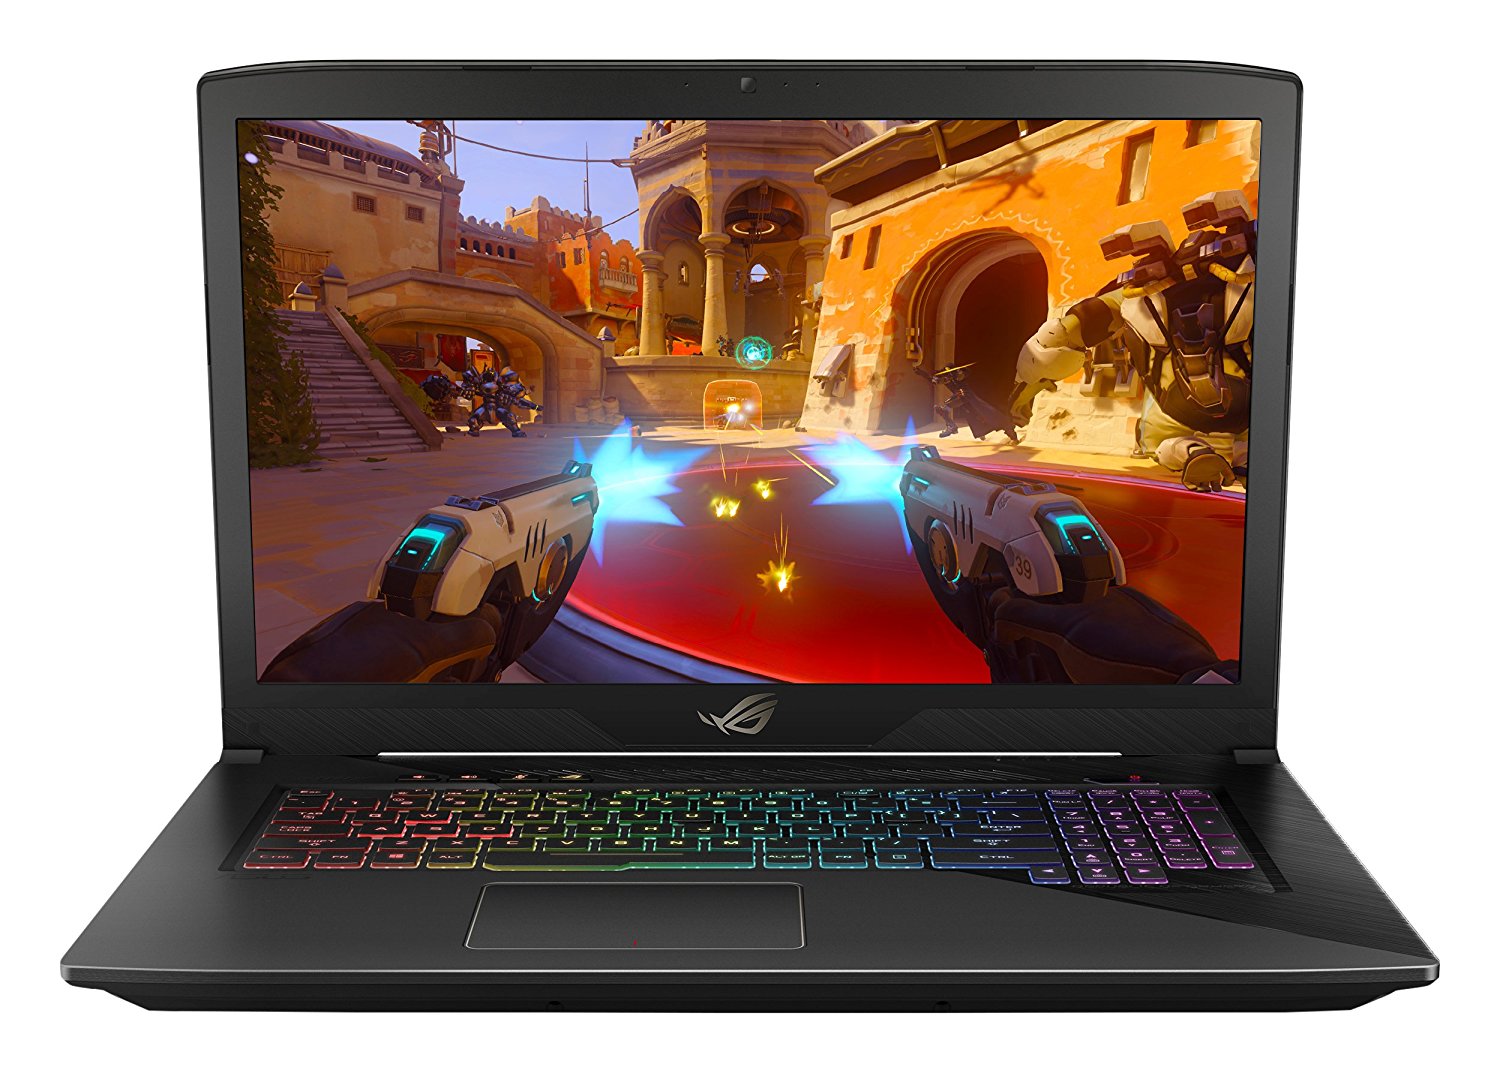 Top 10 Cheapest Gaming Laptops of 2017 - Gameranx